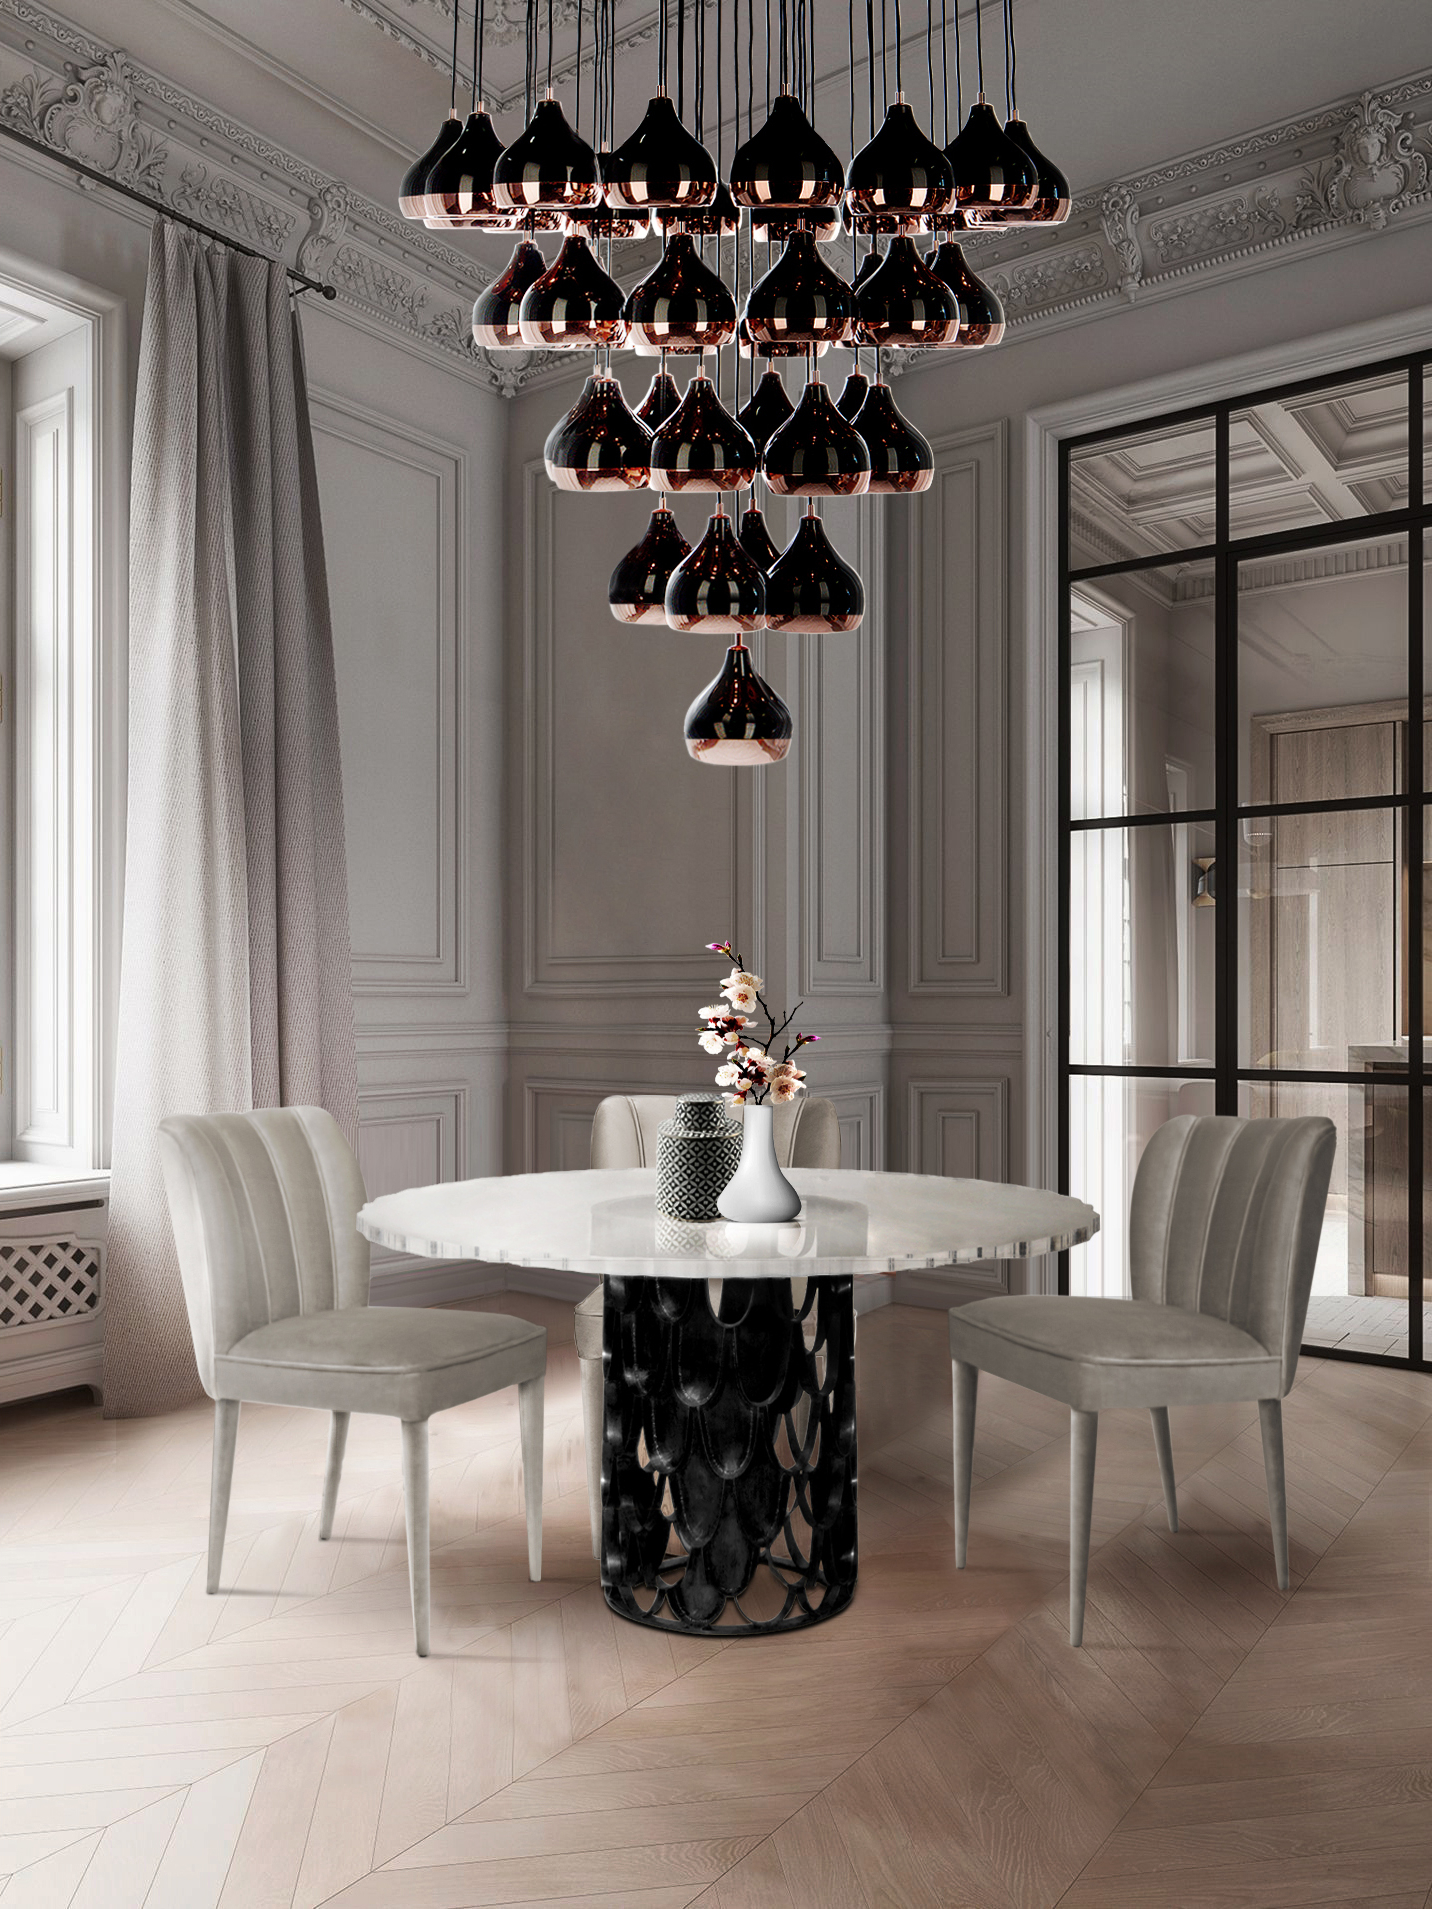 Marvellous Contemporary Dining Room Design with Velvet Dining Chairs - Home'Society